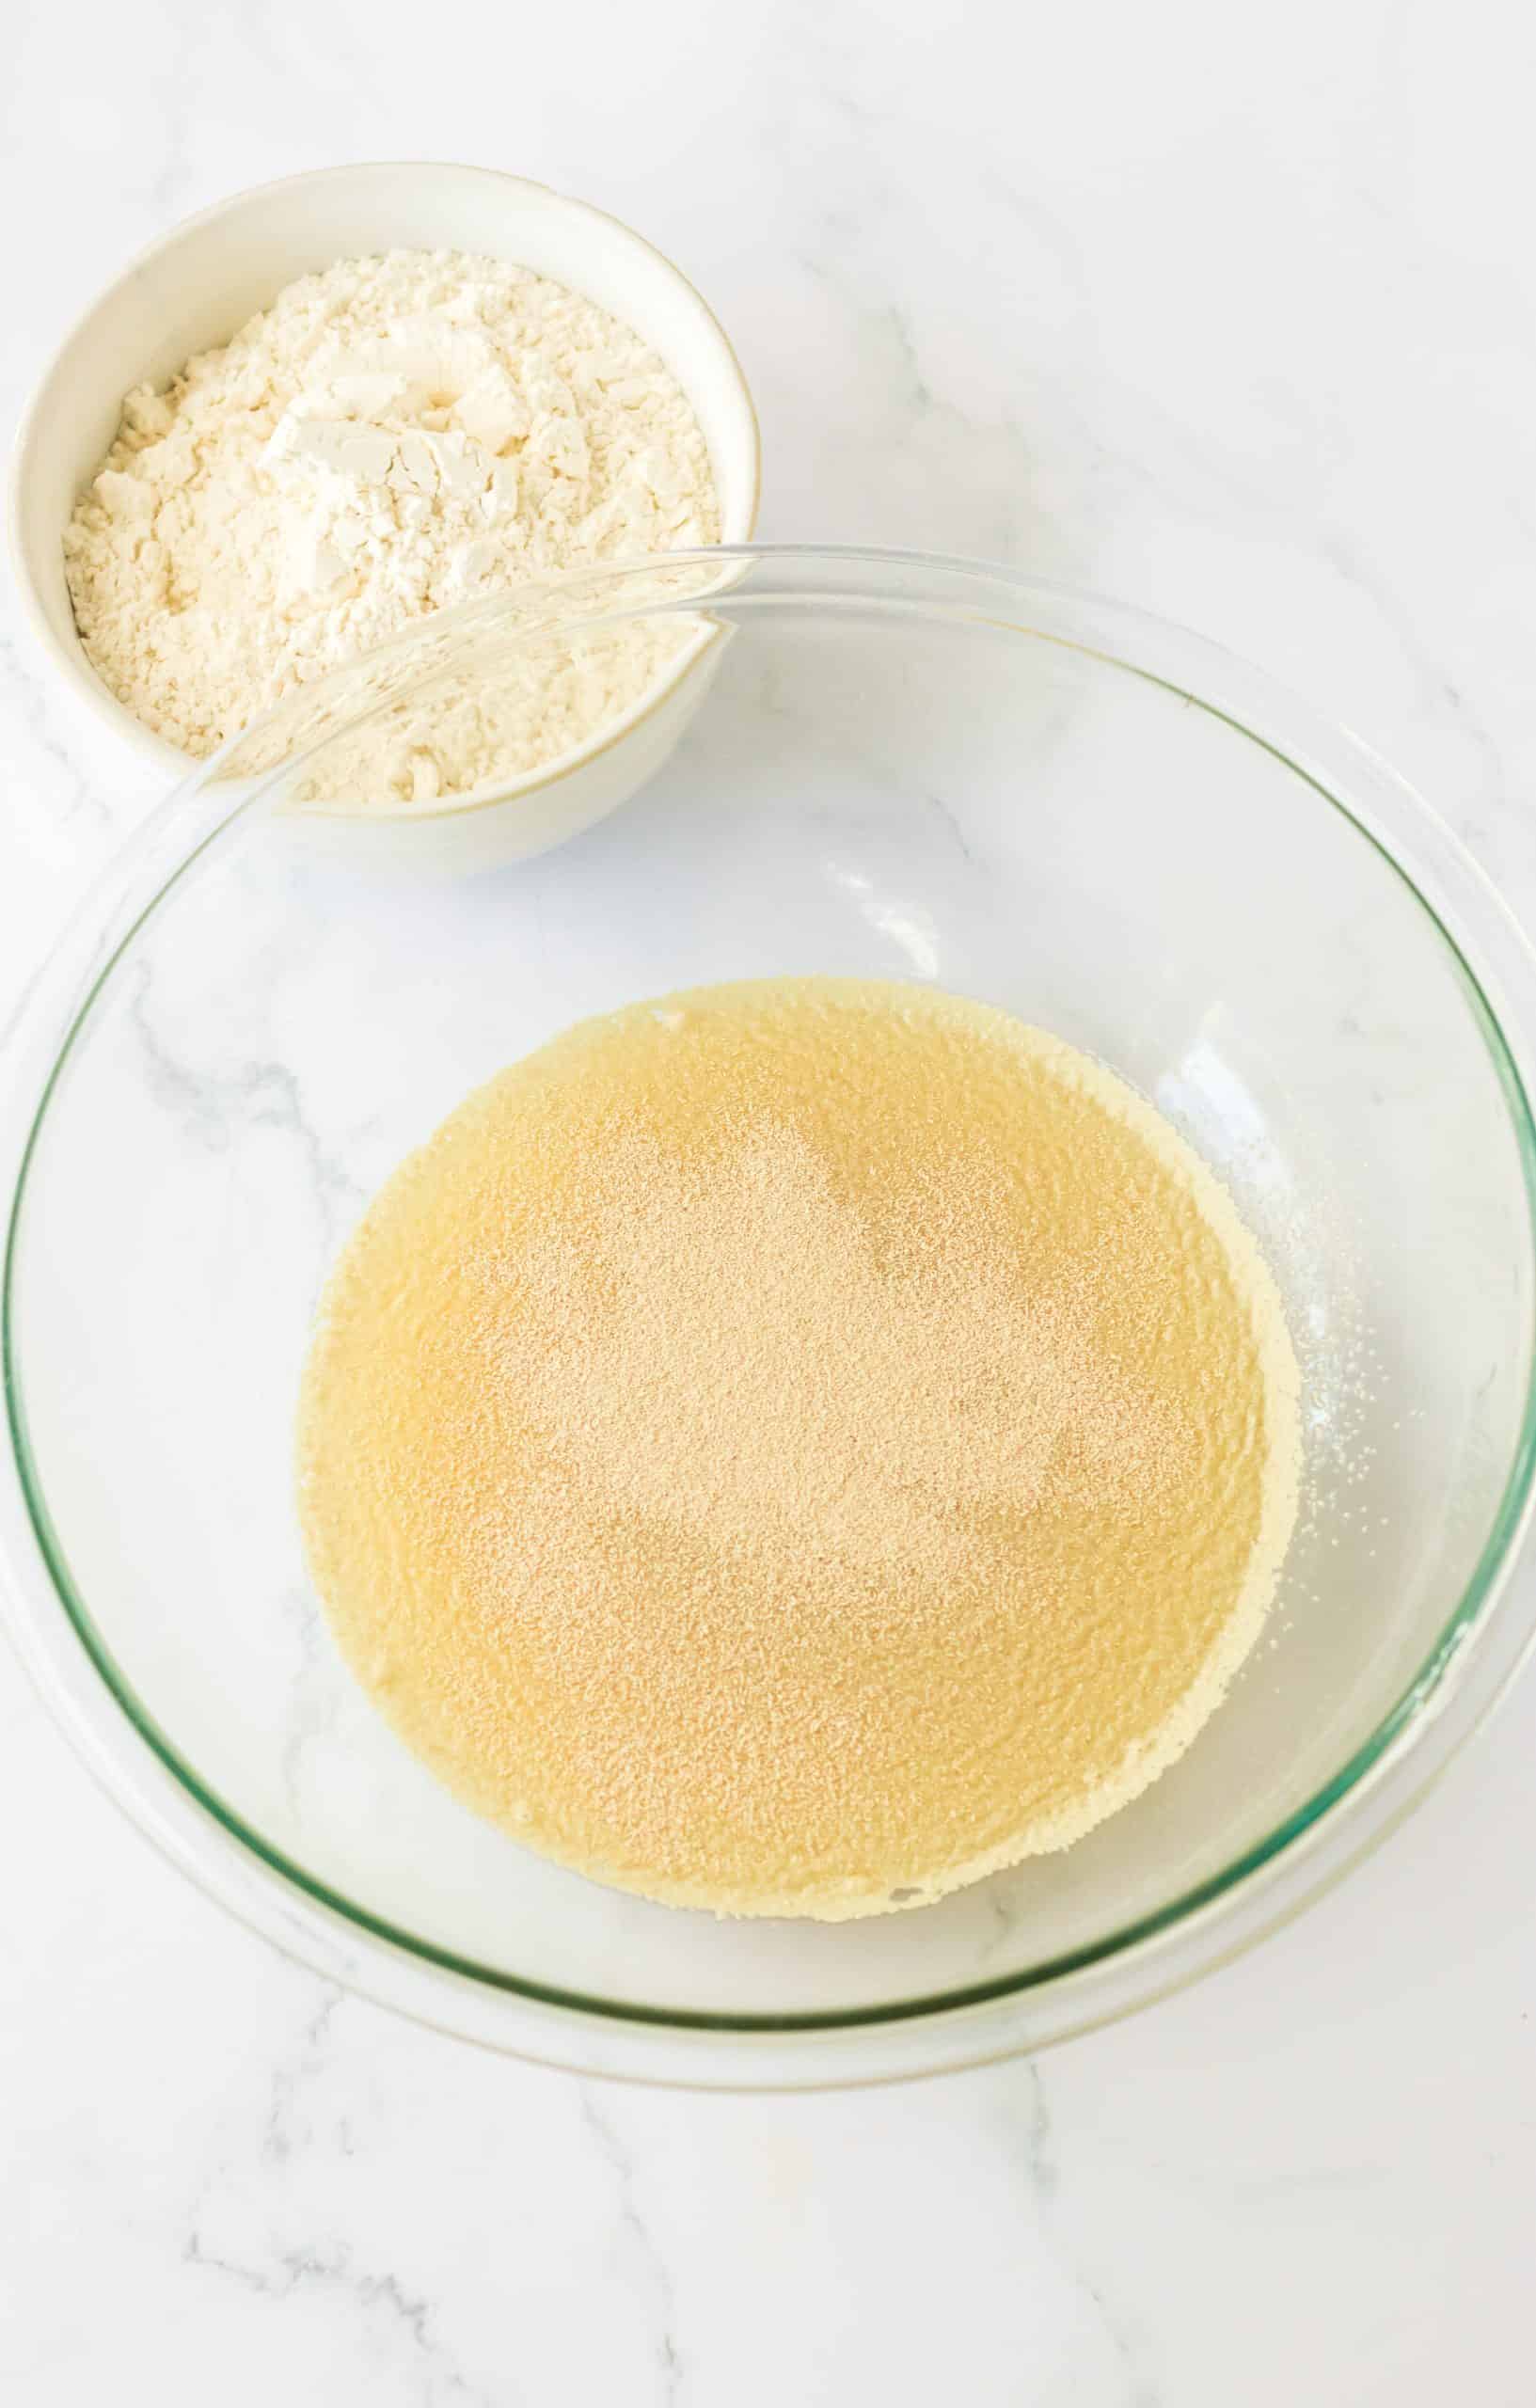 pineapple juice and yeast in a large glass mixing bowl